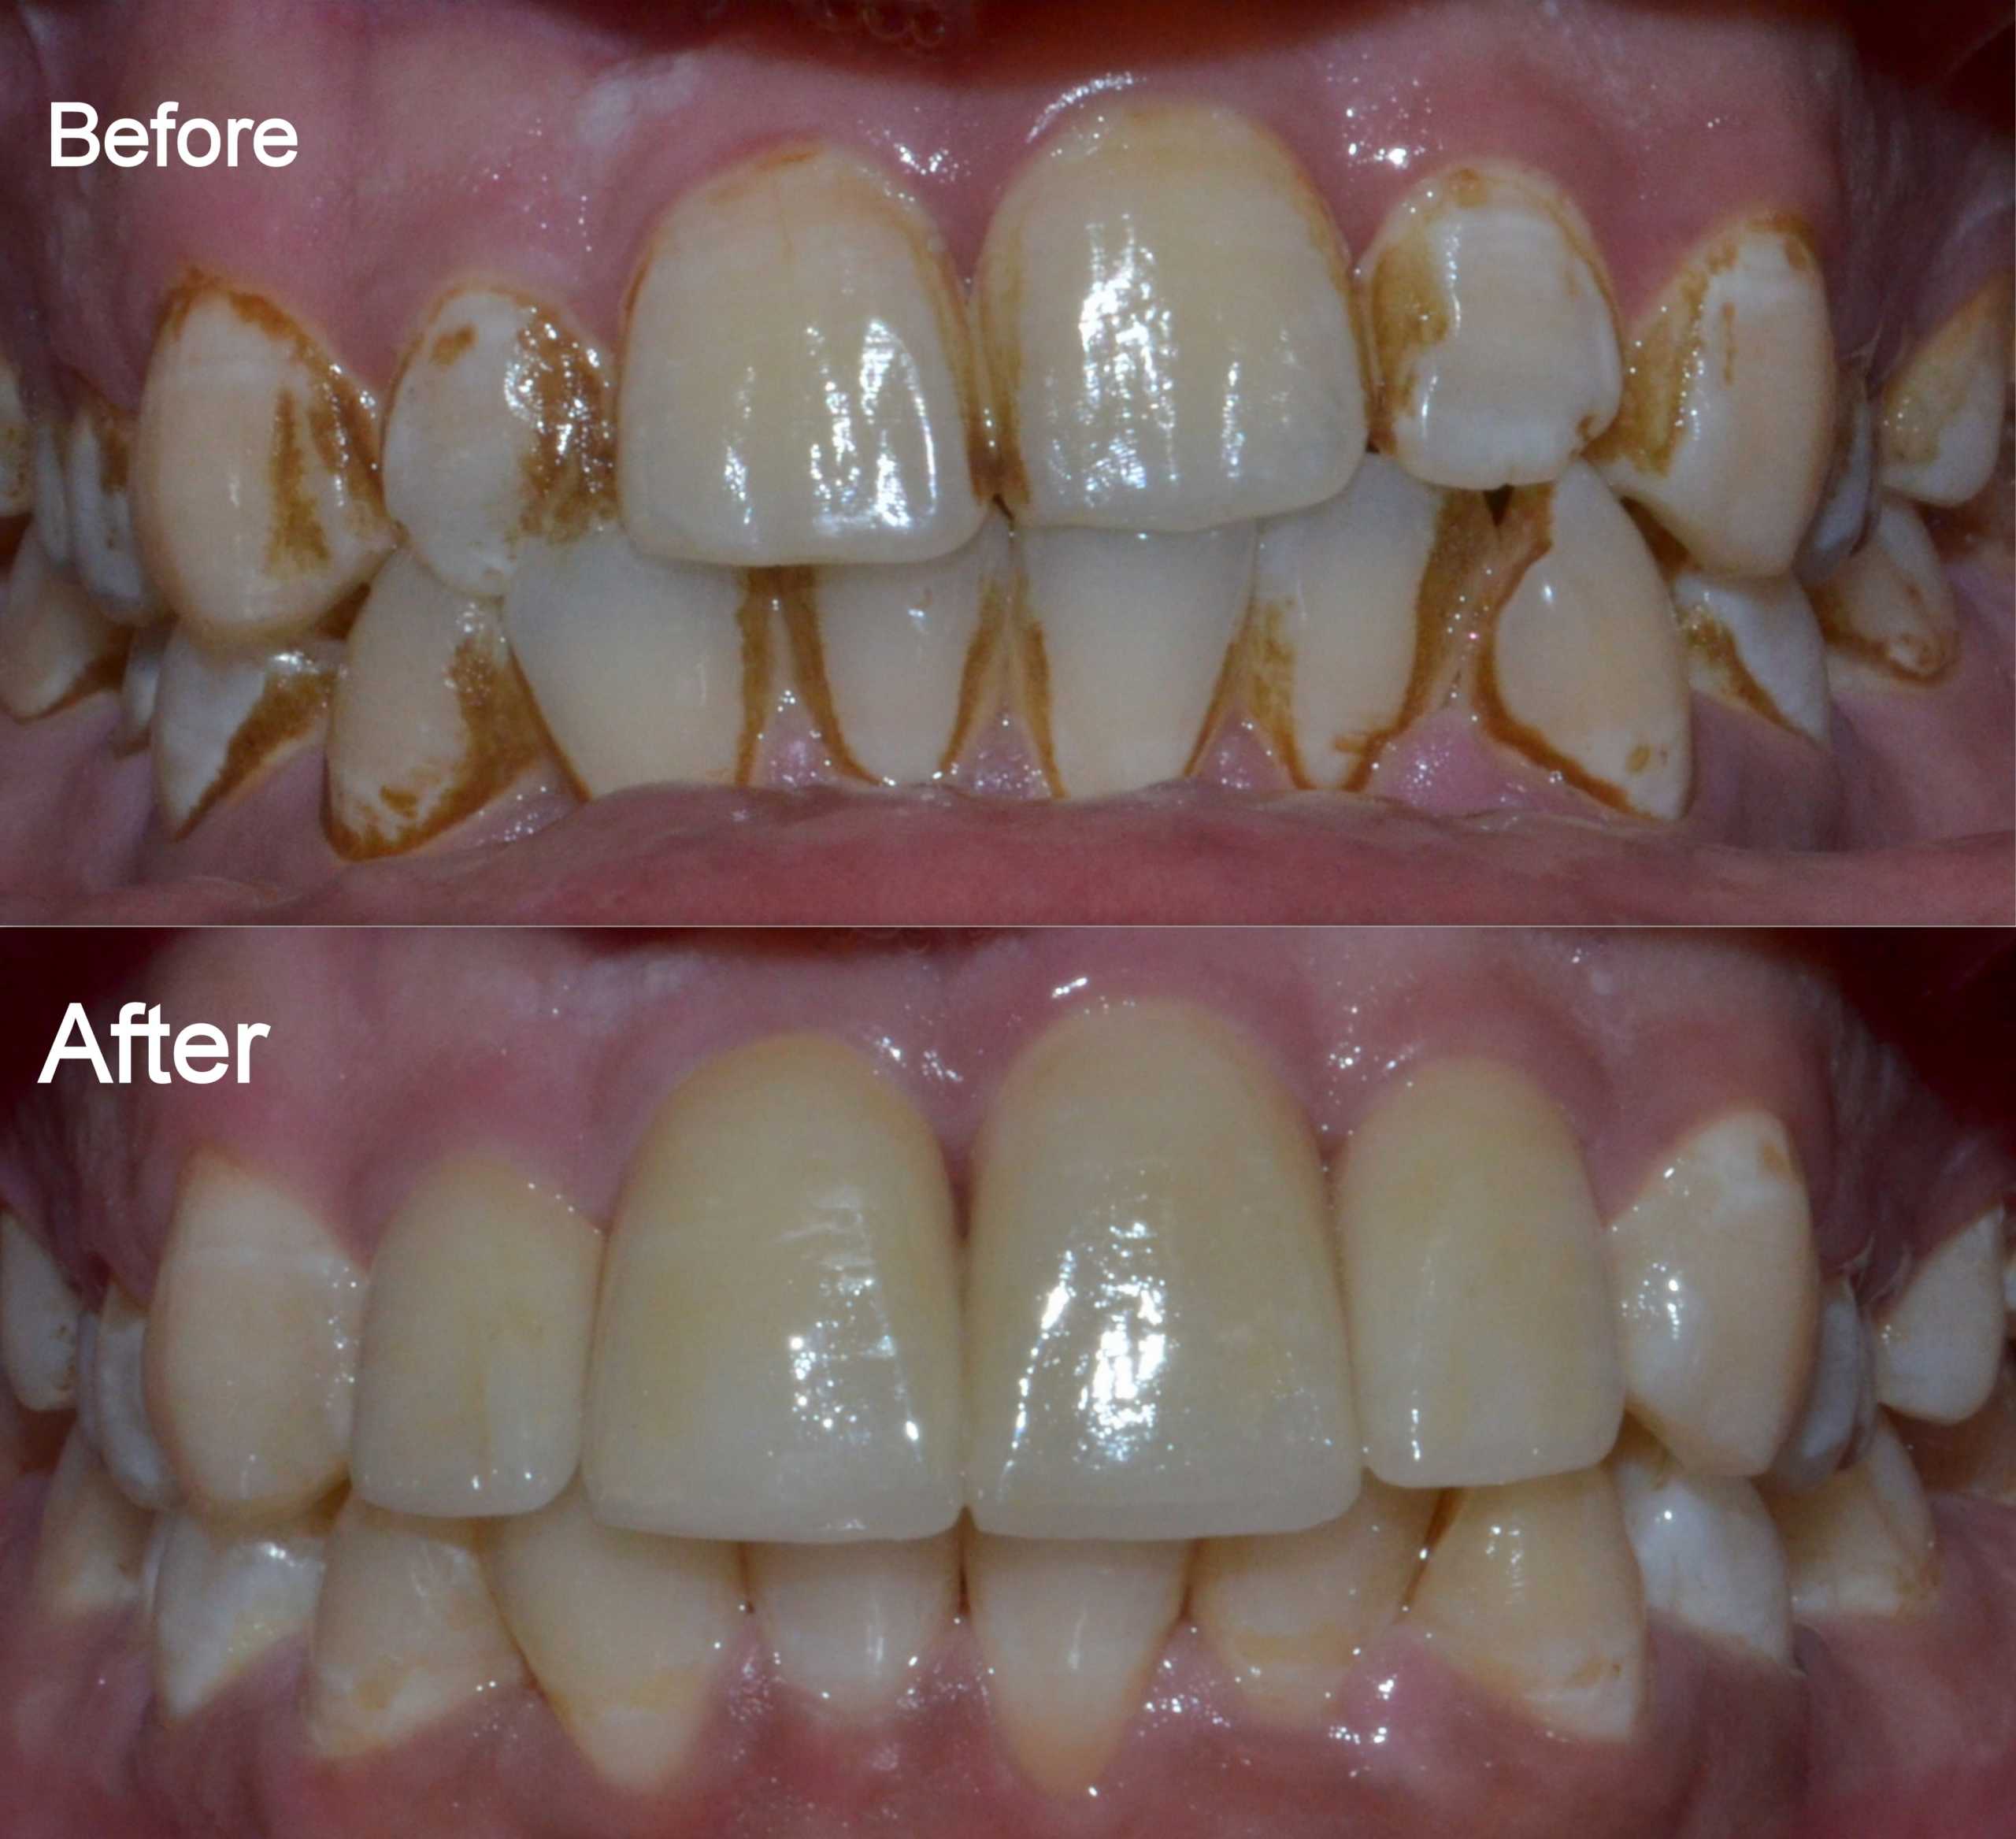 dental crowns to correct bite and increase size of teeth